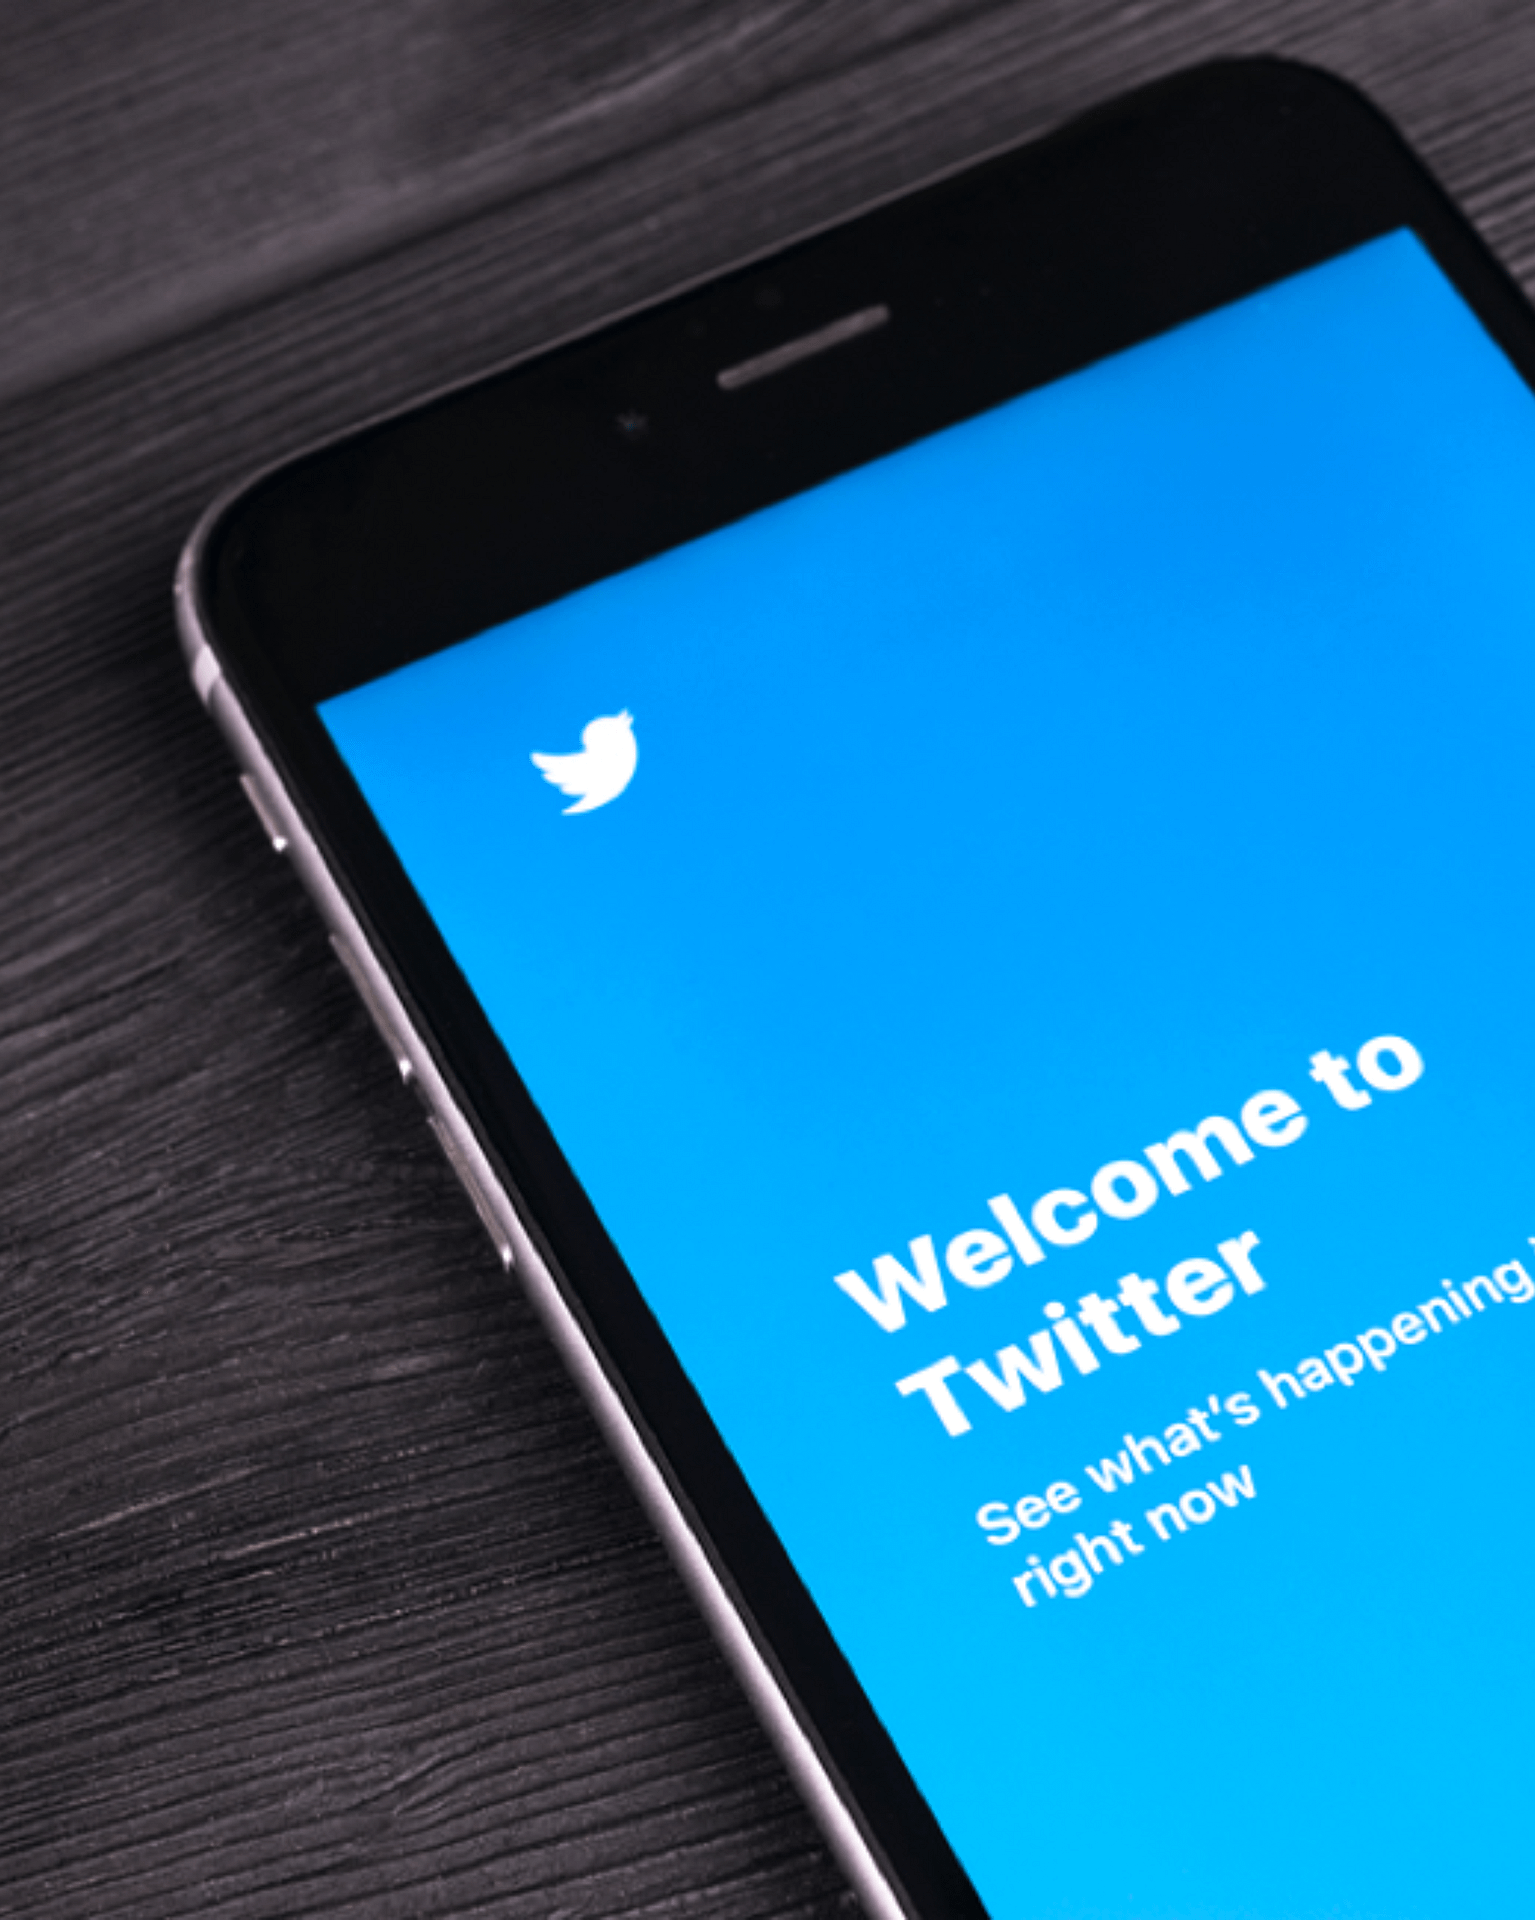 The Best Overall Twitter Accounts to Follow